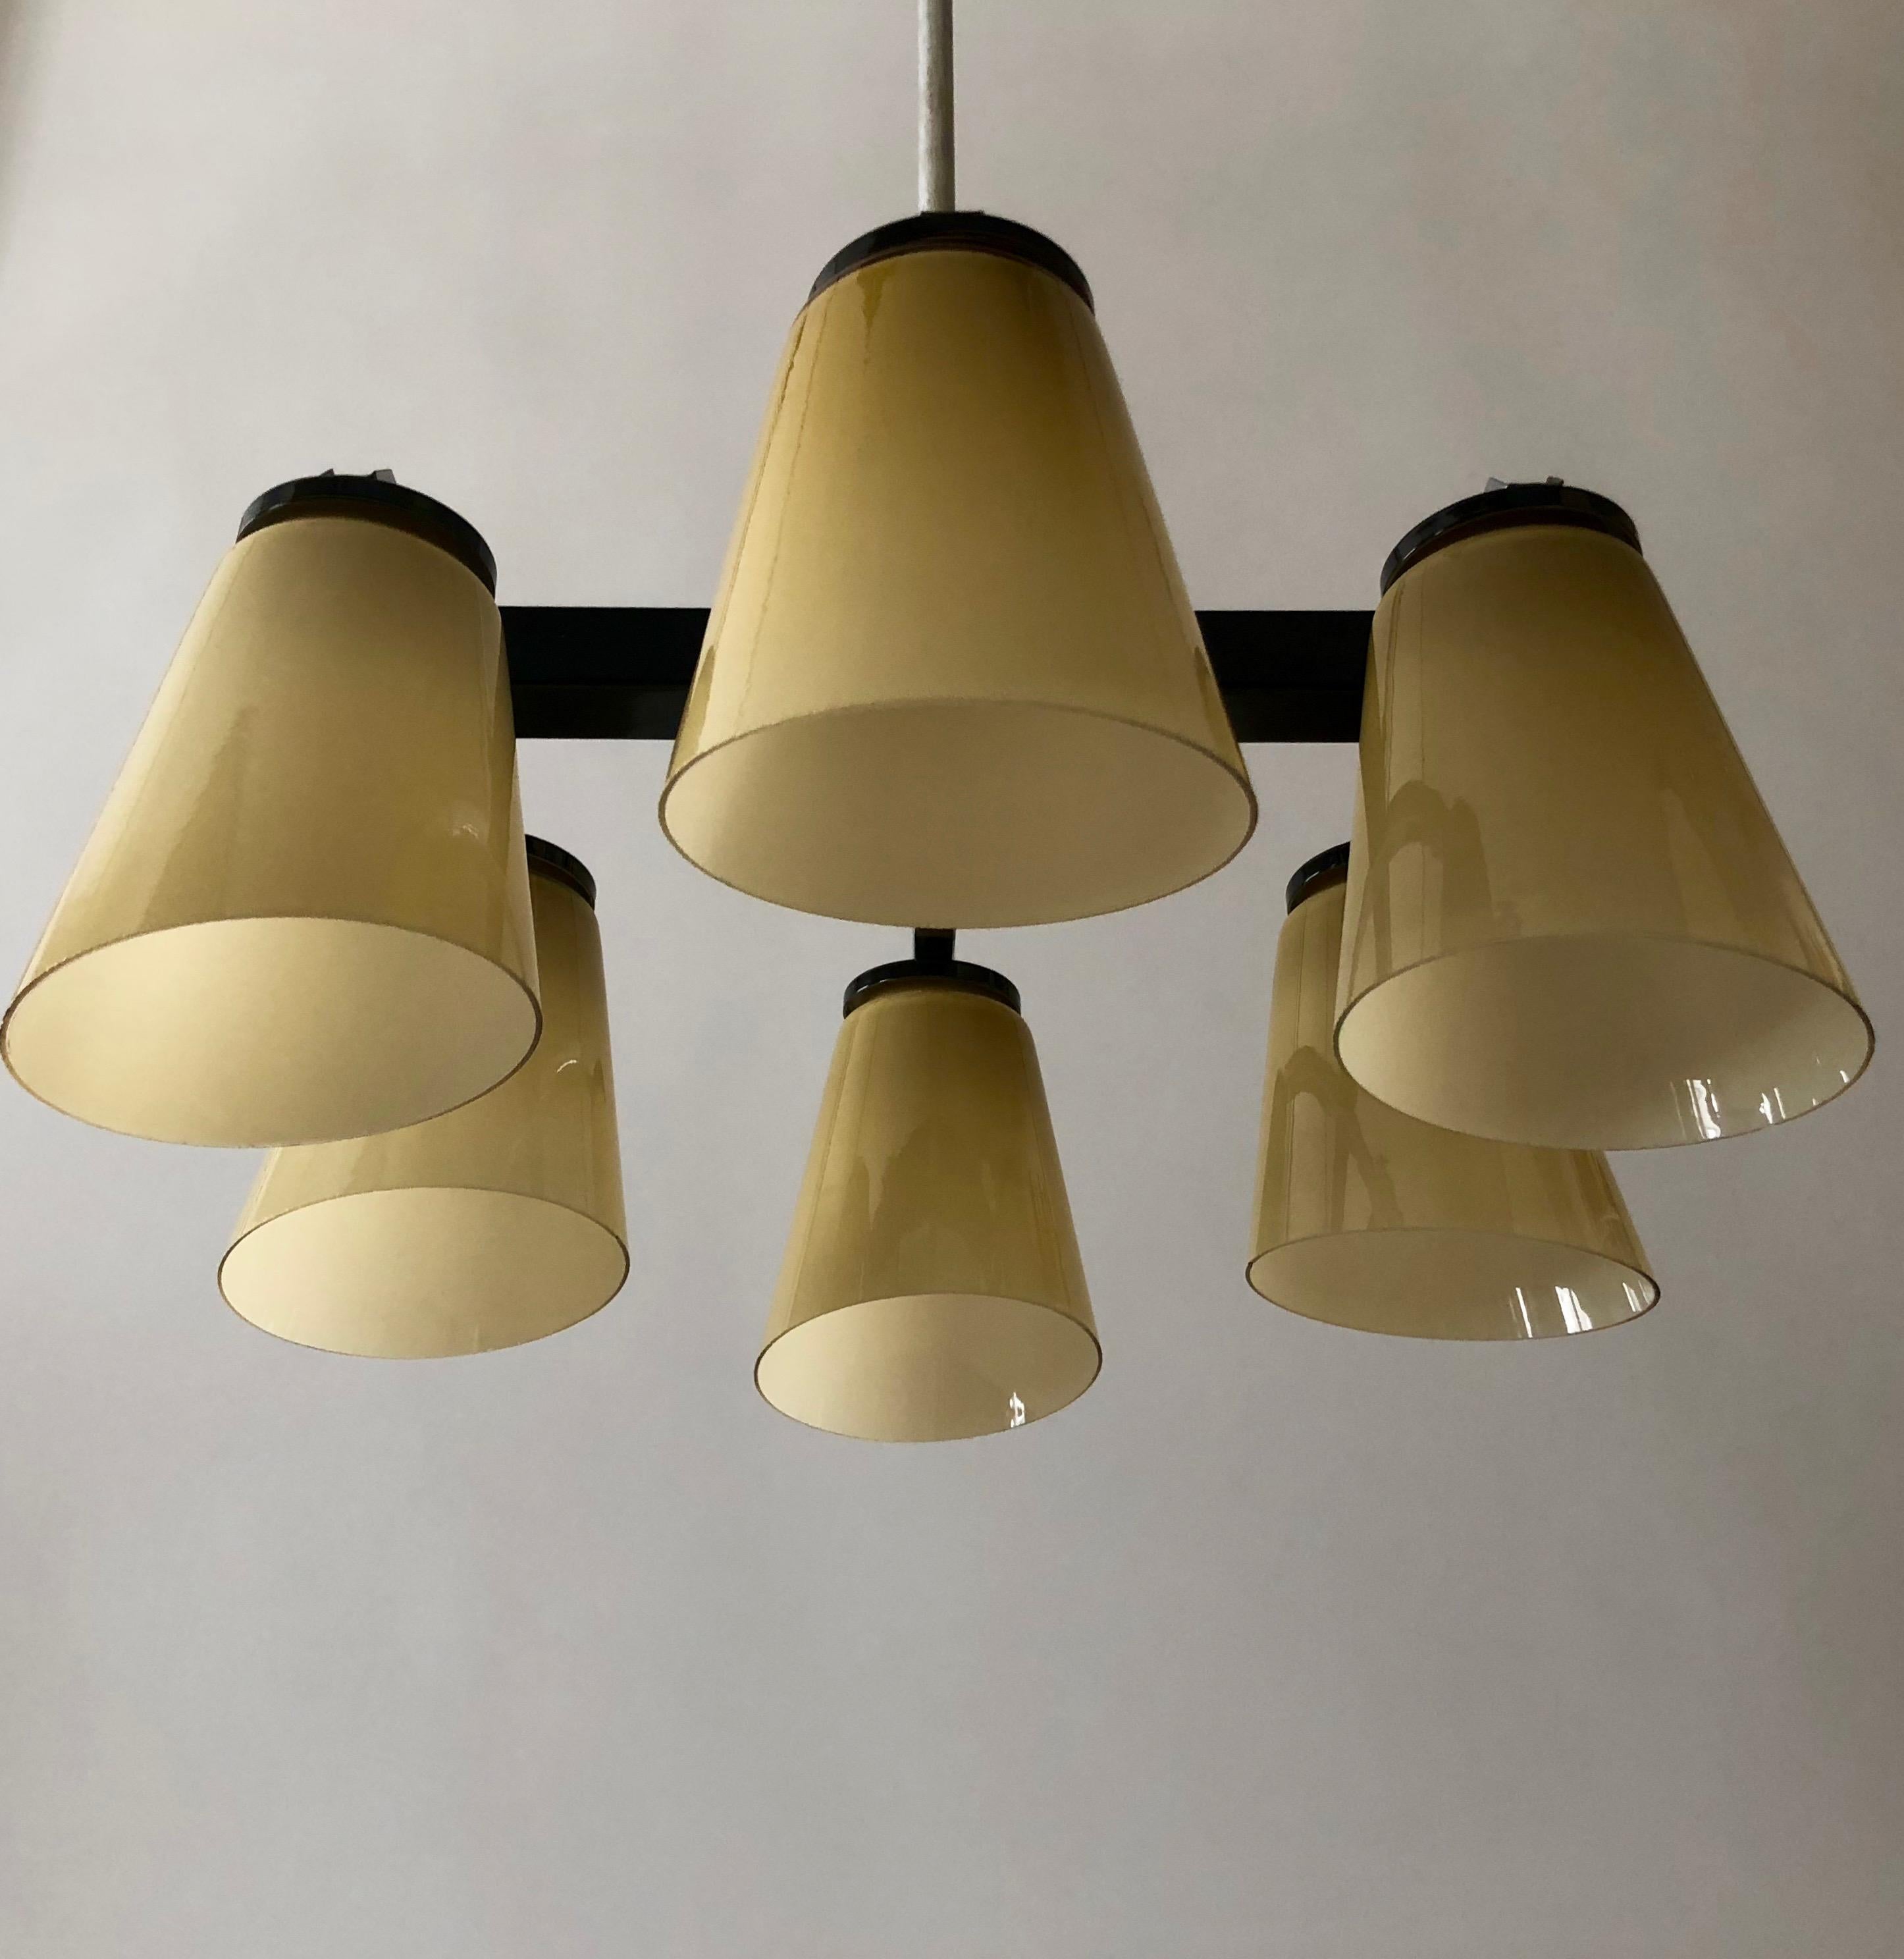 Elegant ceiling lamp in black satined metal and six handmade opaline glass shades from 1950s.
Made in Czechoslovakia. The chandelier is in a very good condition.